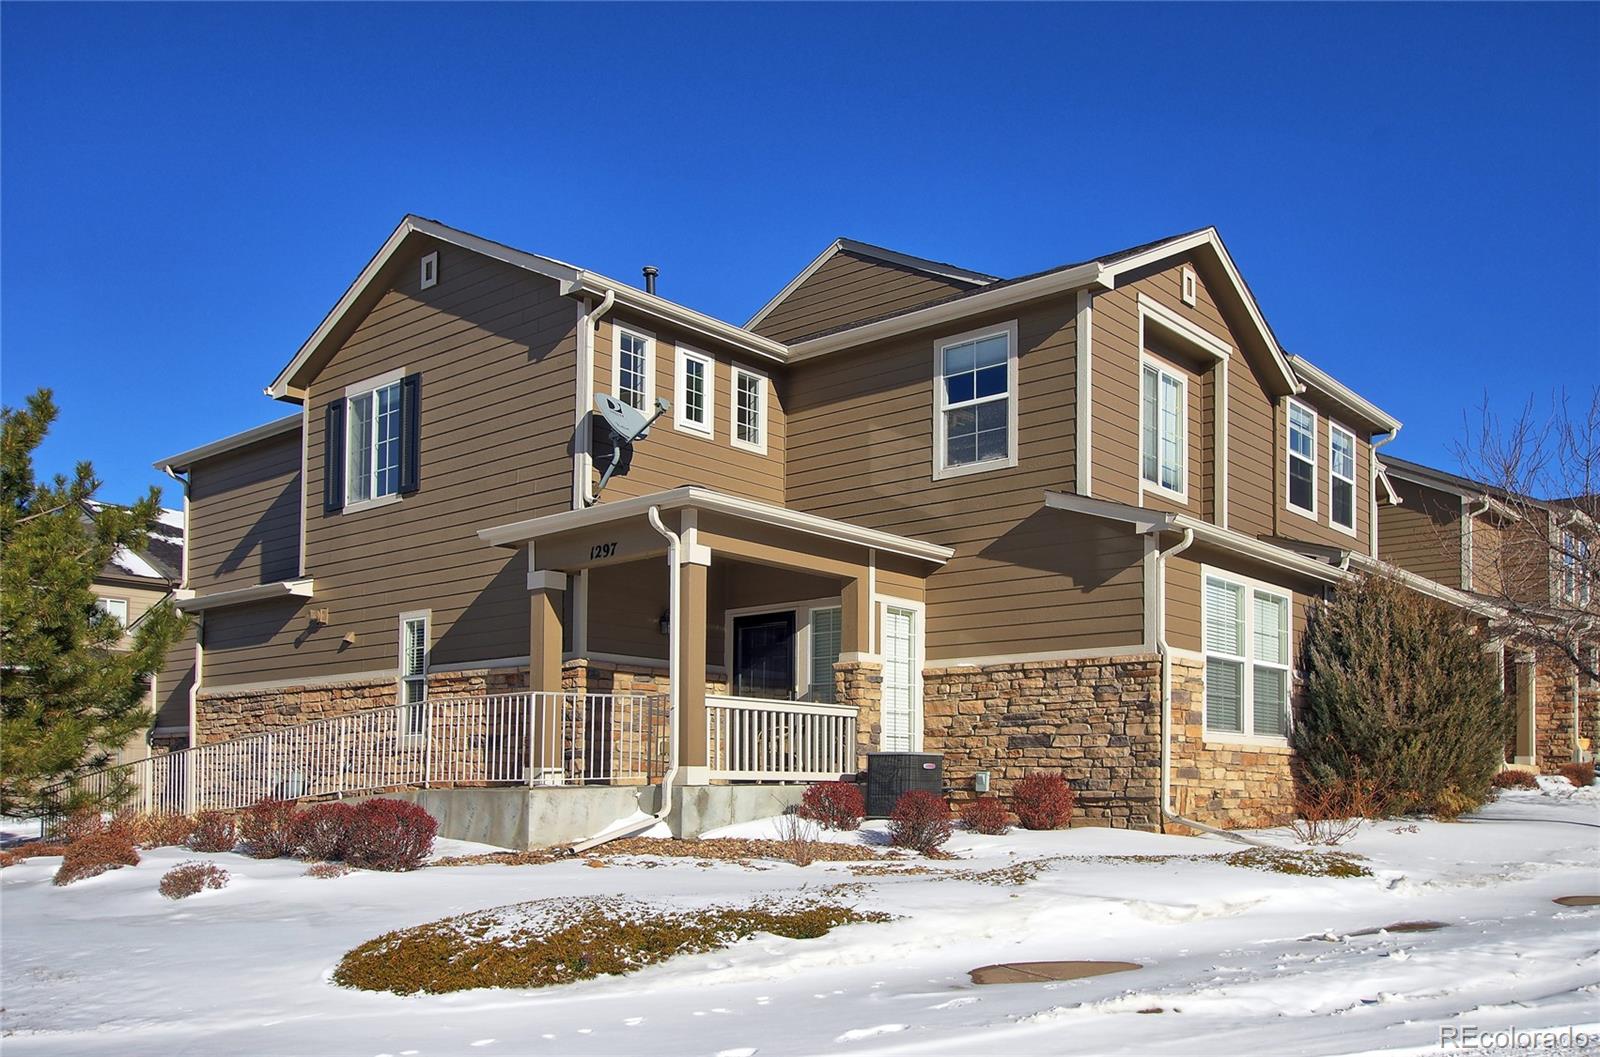 View Monument, CO 80132 townhome